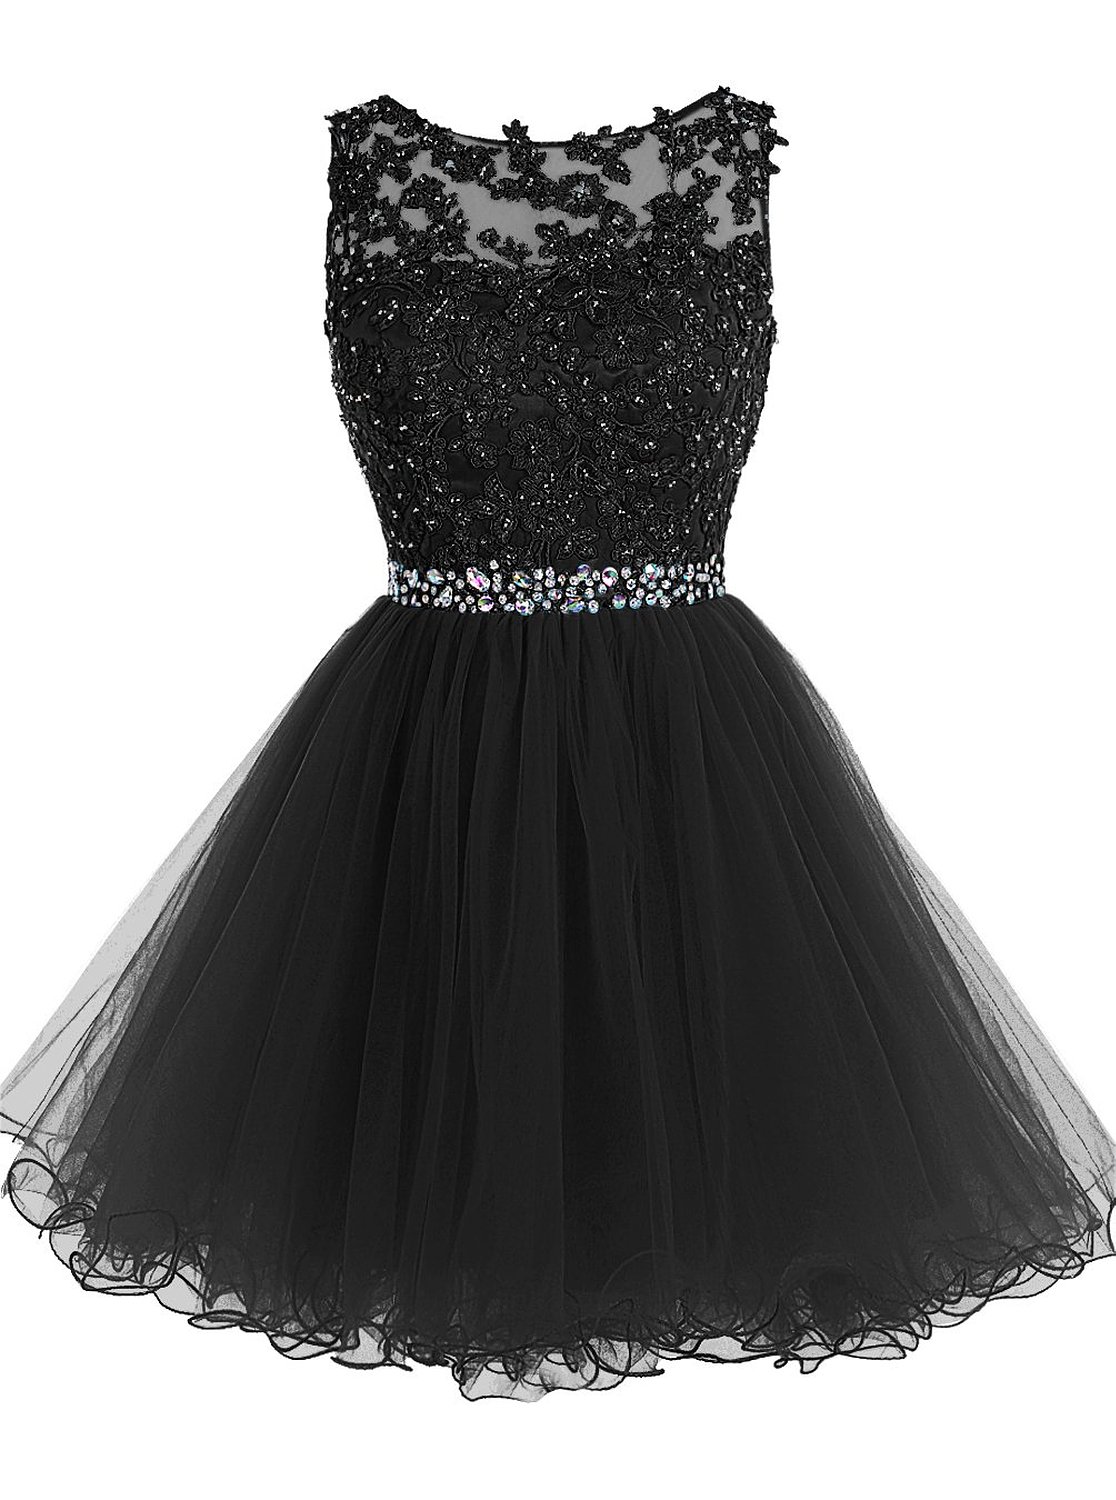 Sexy Black Short Prom Dress Lace Prom Dress Prom Party Gown Short Beaded Prom Dress Tulle Applique Evening Dress Homecoming Dresses